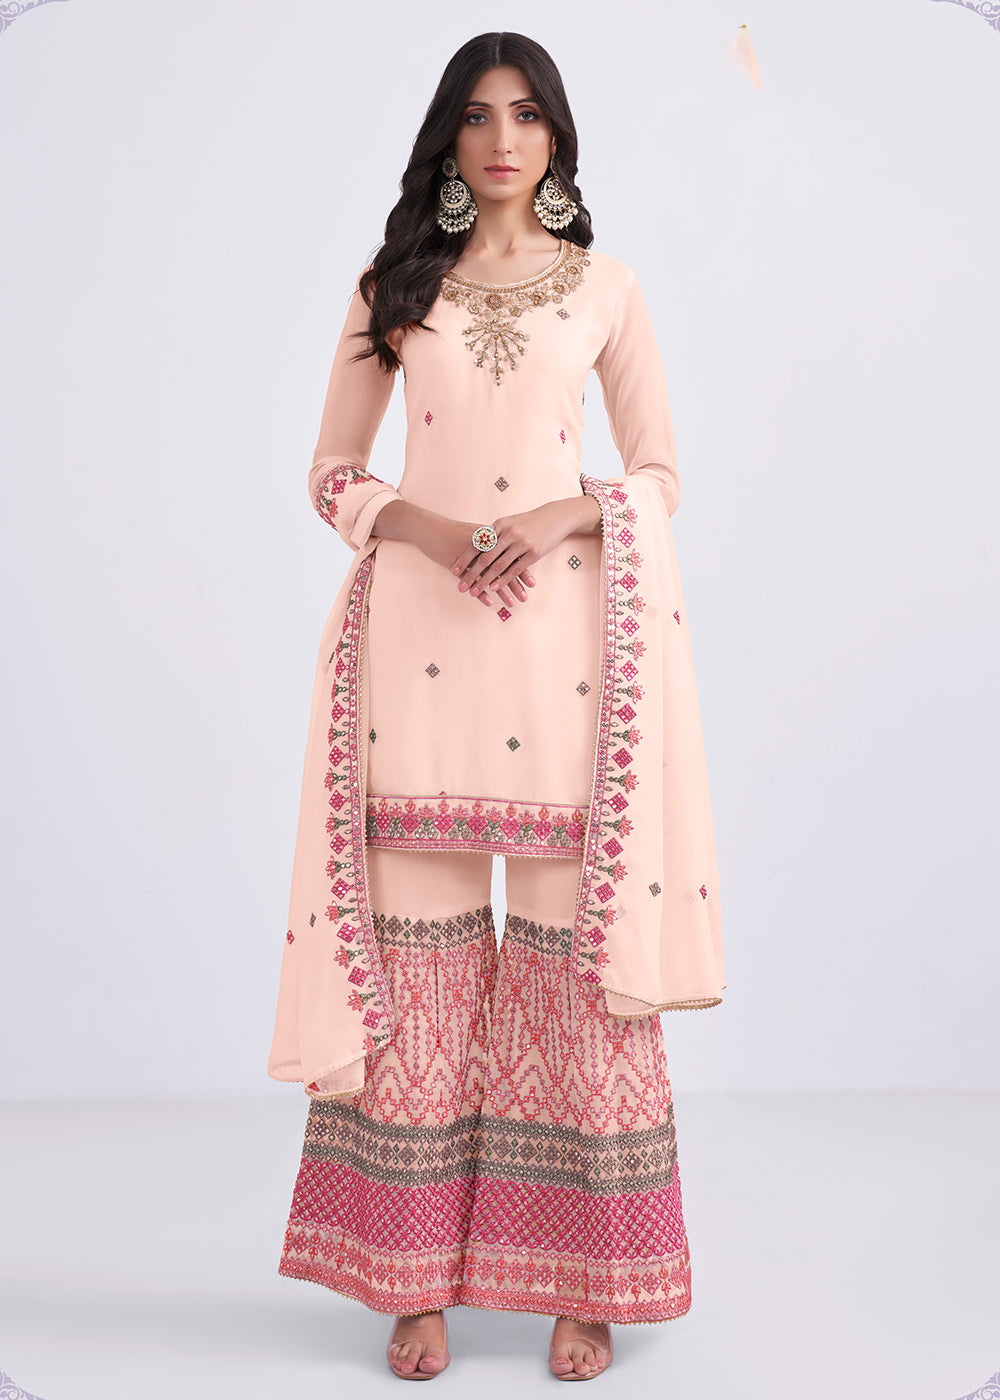 Shop Now Pretty Peach Sequins & Multi Thread Work Designer Sharara Suit Online at Empress Clothing in USA, UK, Canada, Germany & Worldwide. 